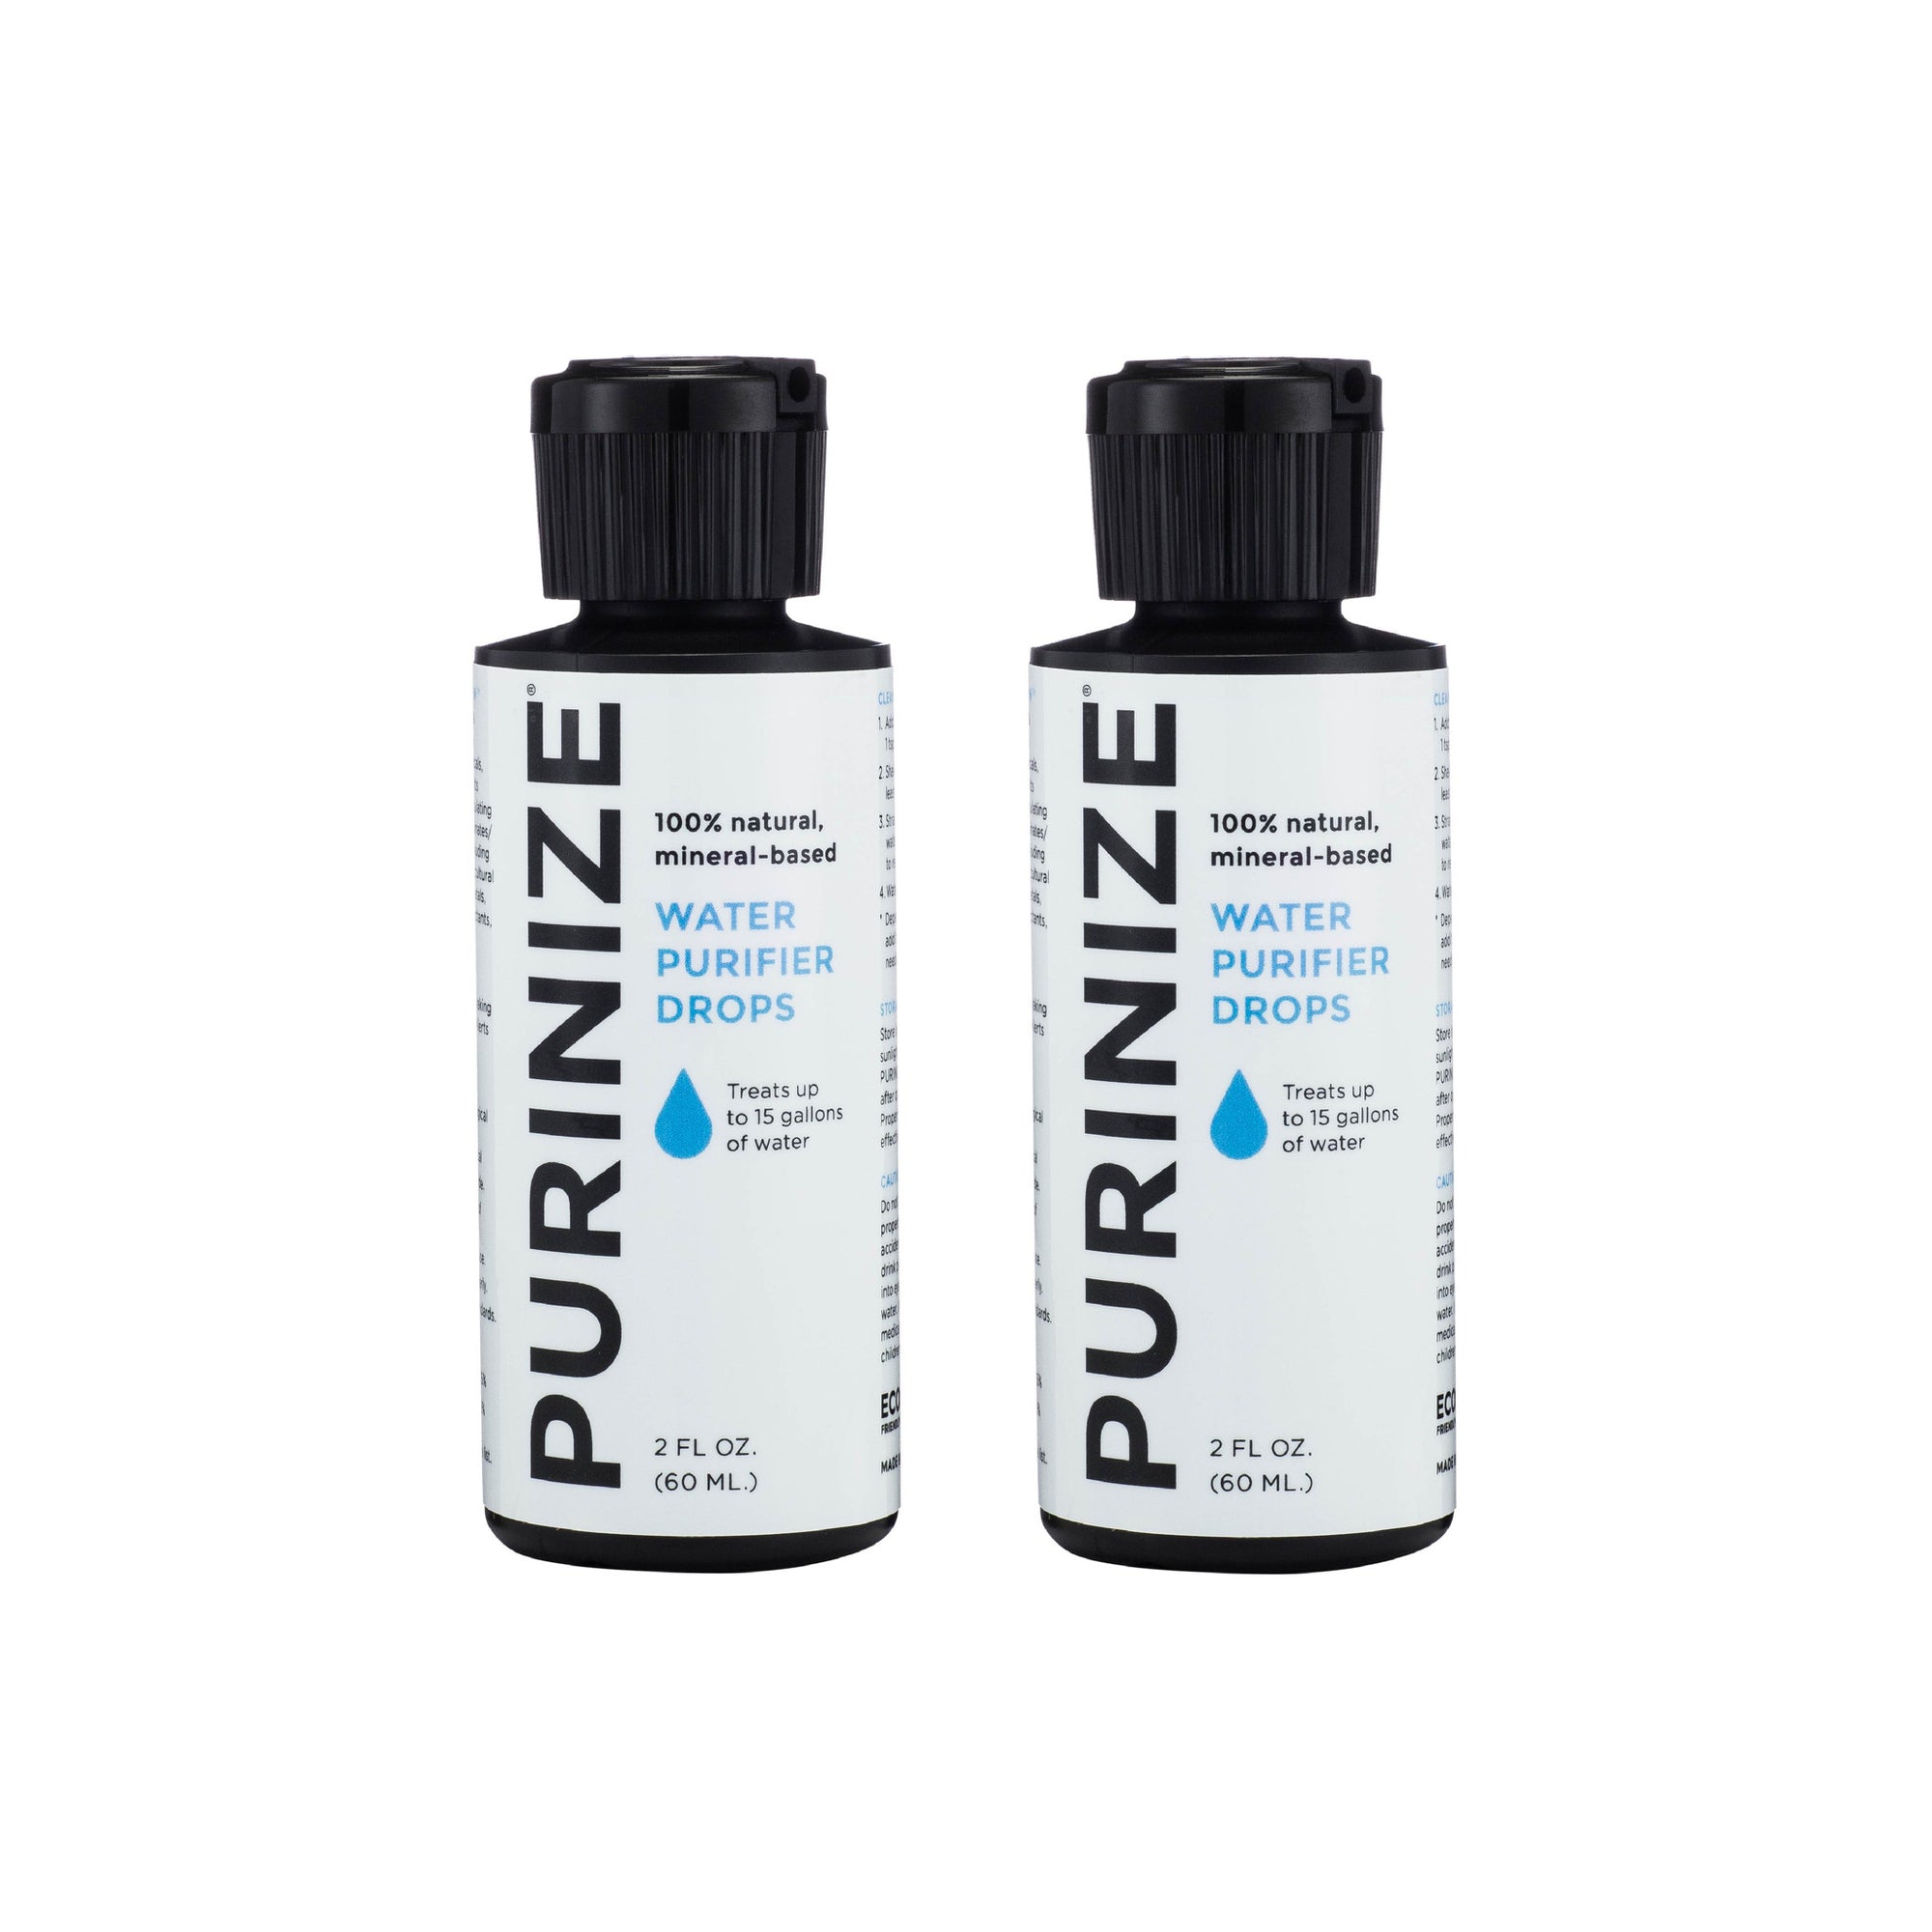 PURINIZE® WATER PURIFIER DROPS 2 OZ. 2-PACK (10% OFF)